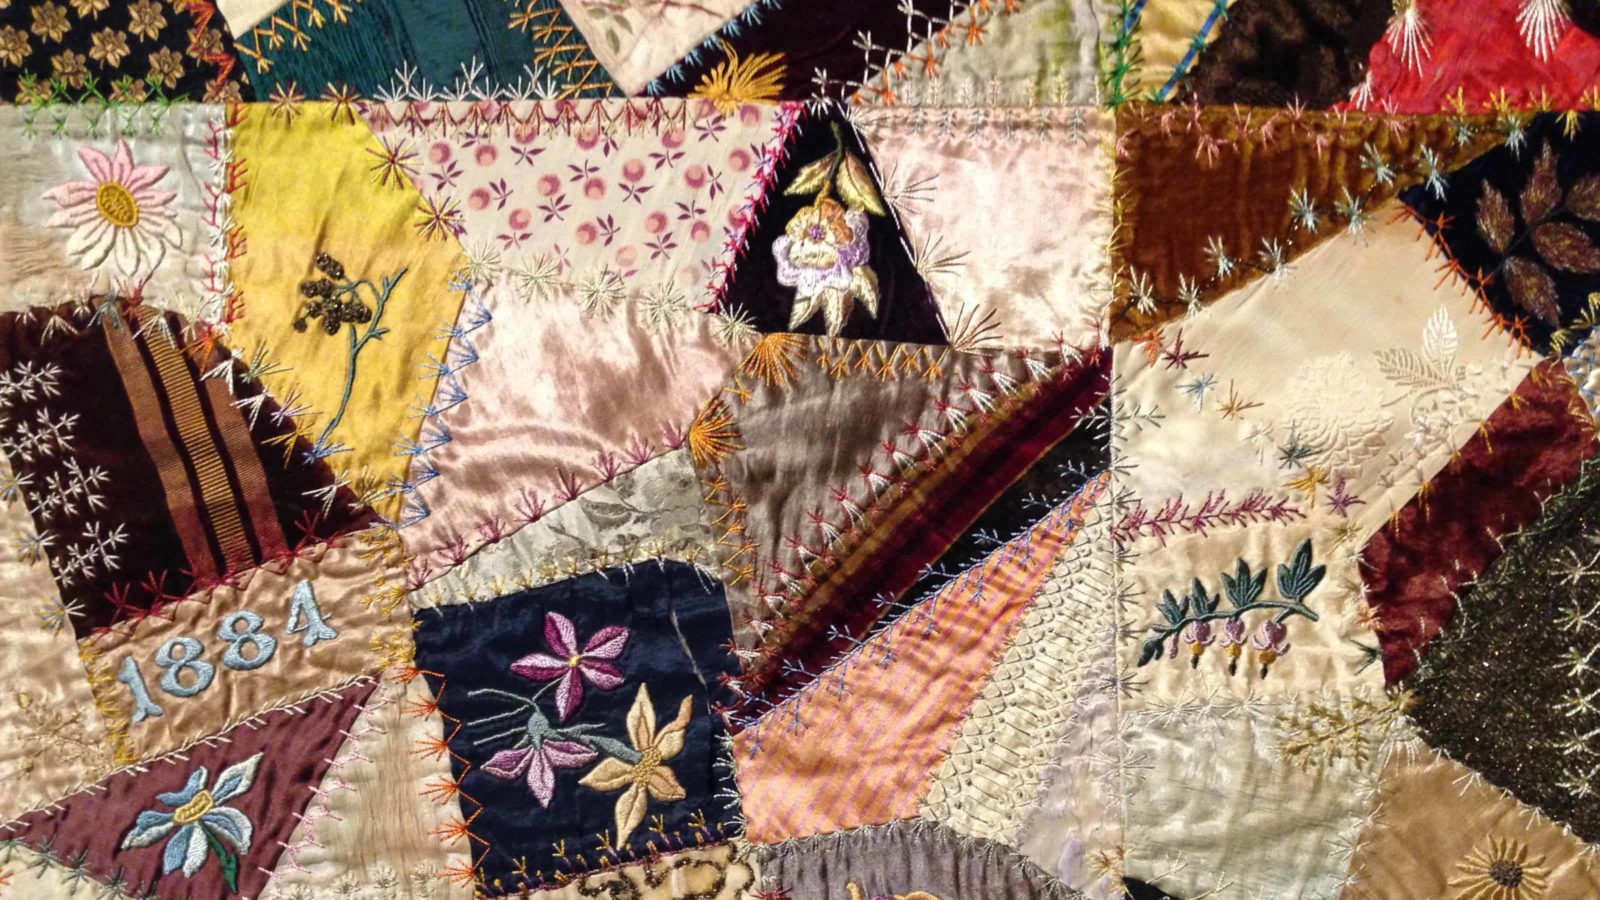 A close-up of a crazy quilt at Bennignton Museum shows bright, scraps of cloth in varied colors and textures, with patters of stitching and embroidered flowers.